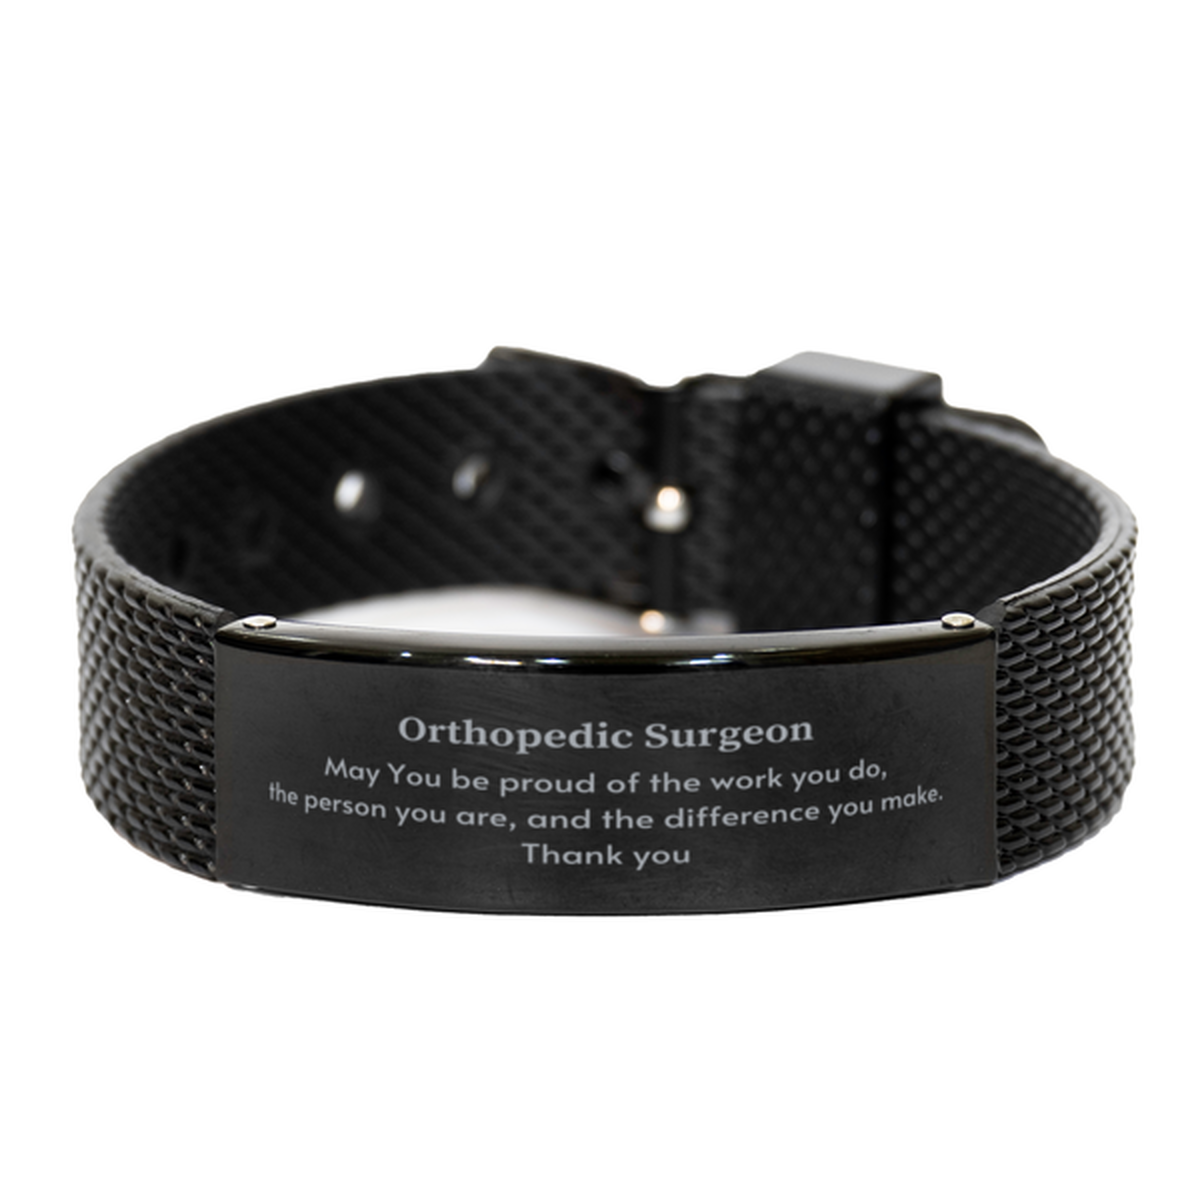 Heartwarming Black Shark Mesh Bracelet Retirement Coworkers Gifts for Orthopedic Surgeon, Orthopedic Surgeon May You be proud of the work you do, the person you are Gifts for Boss Men Women Friends